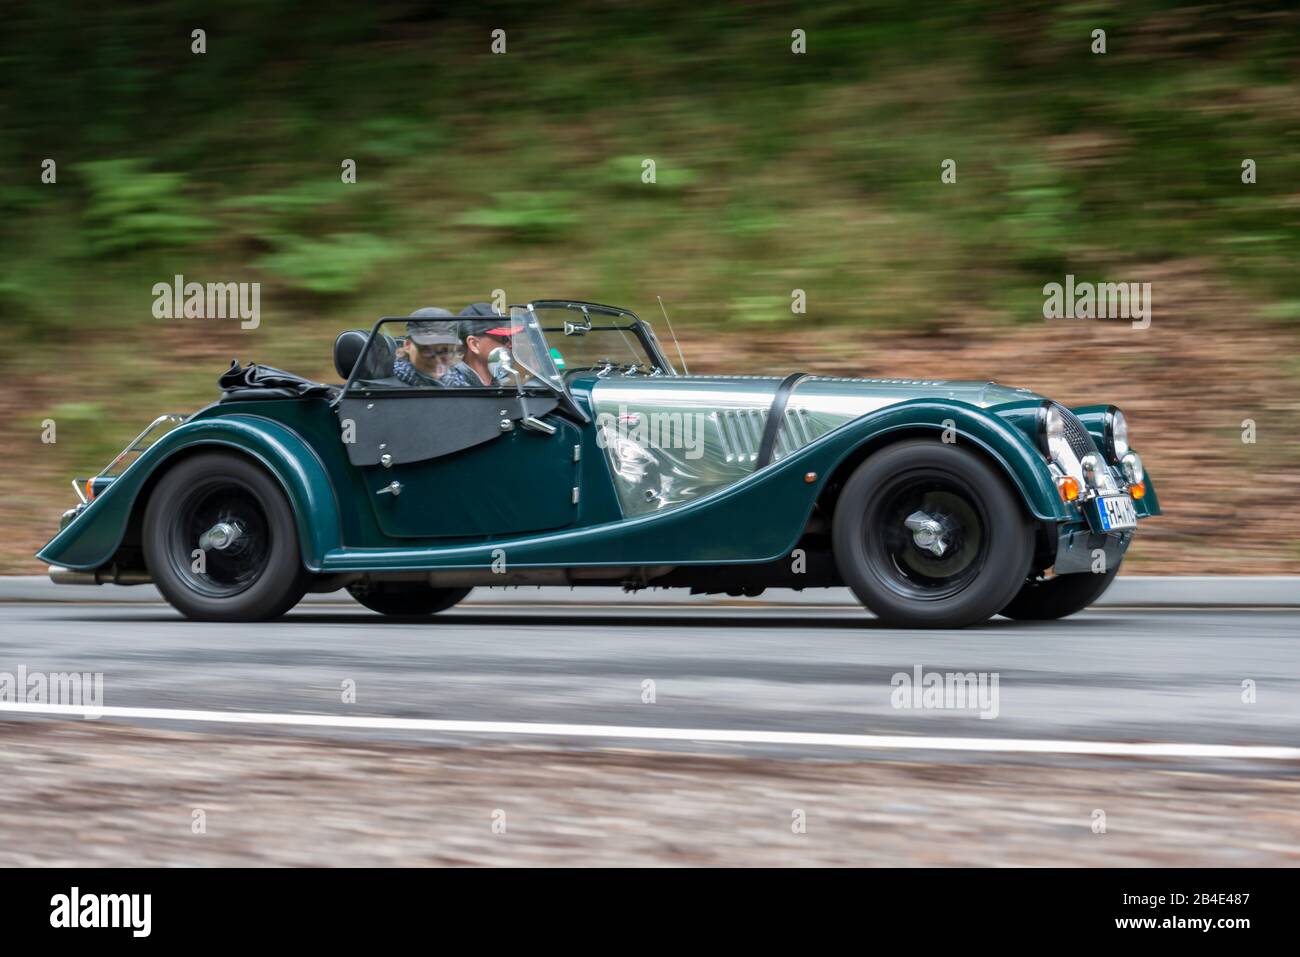 Bad König, Hesse, Germany, Morgan, Roadster, built in 2014, 3.7-liter displacement, 209 KW at the classic festival. Stock Photo